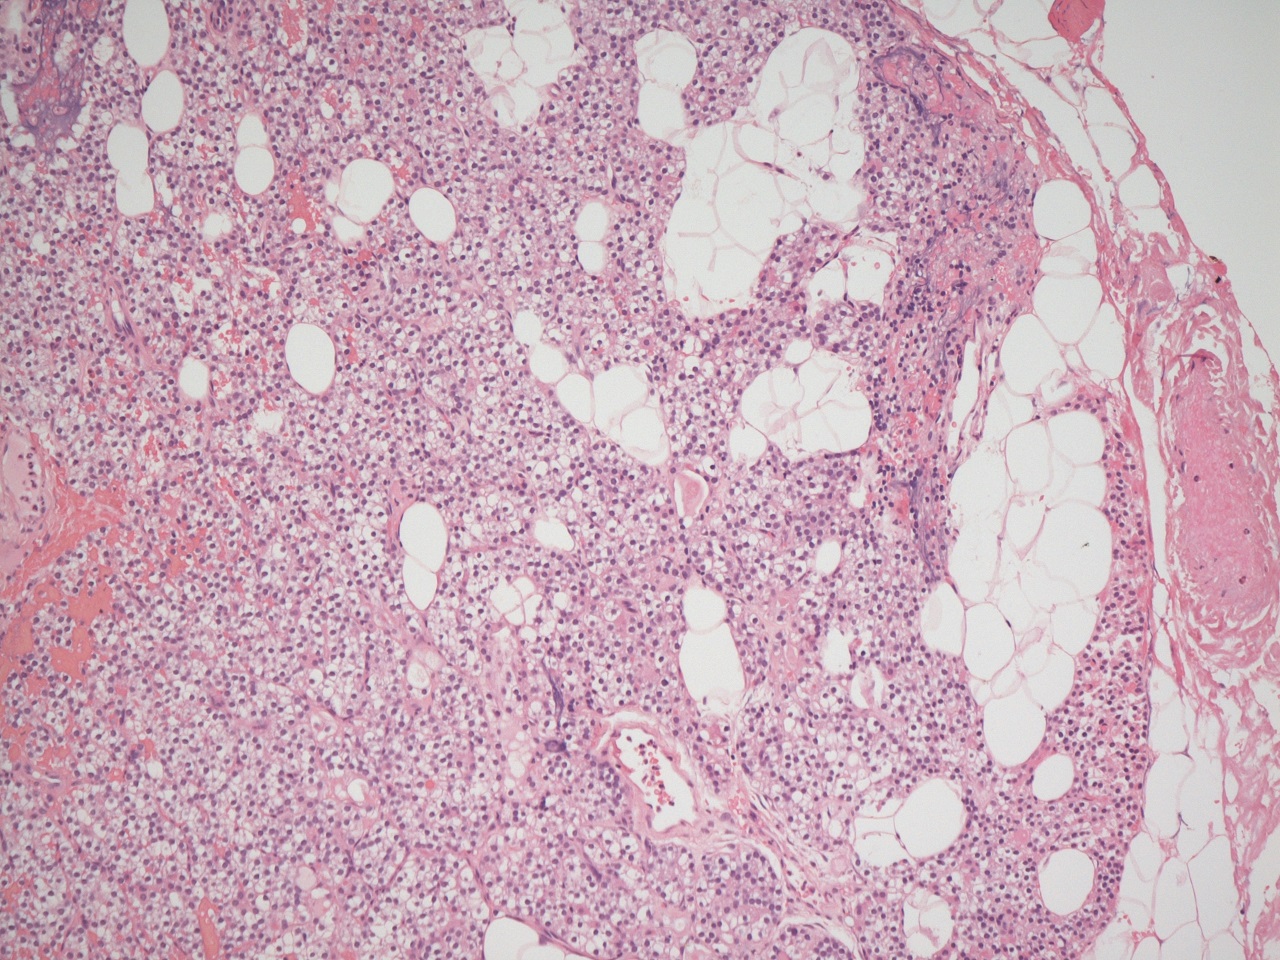 Histology of the parathyroid gland